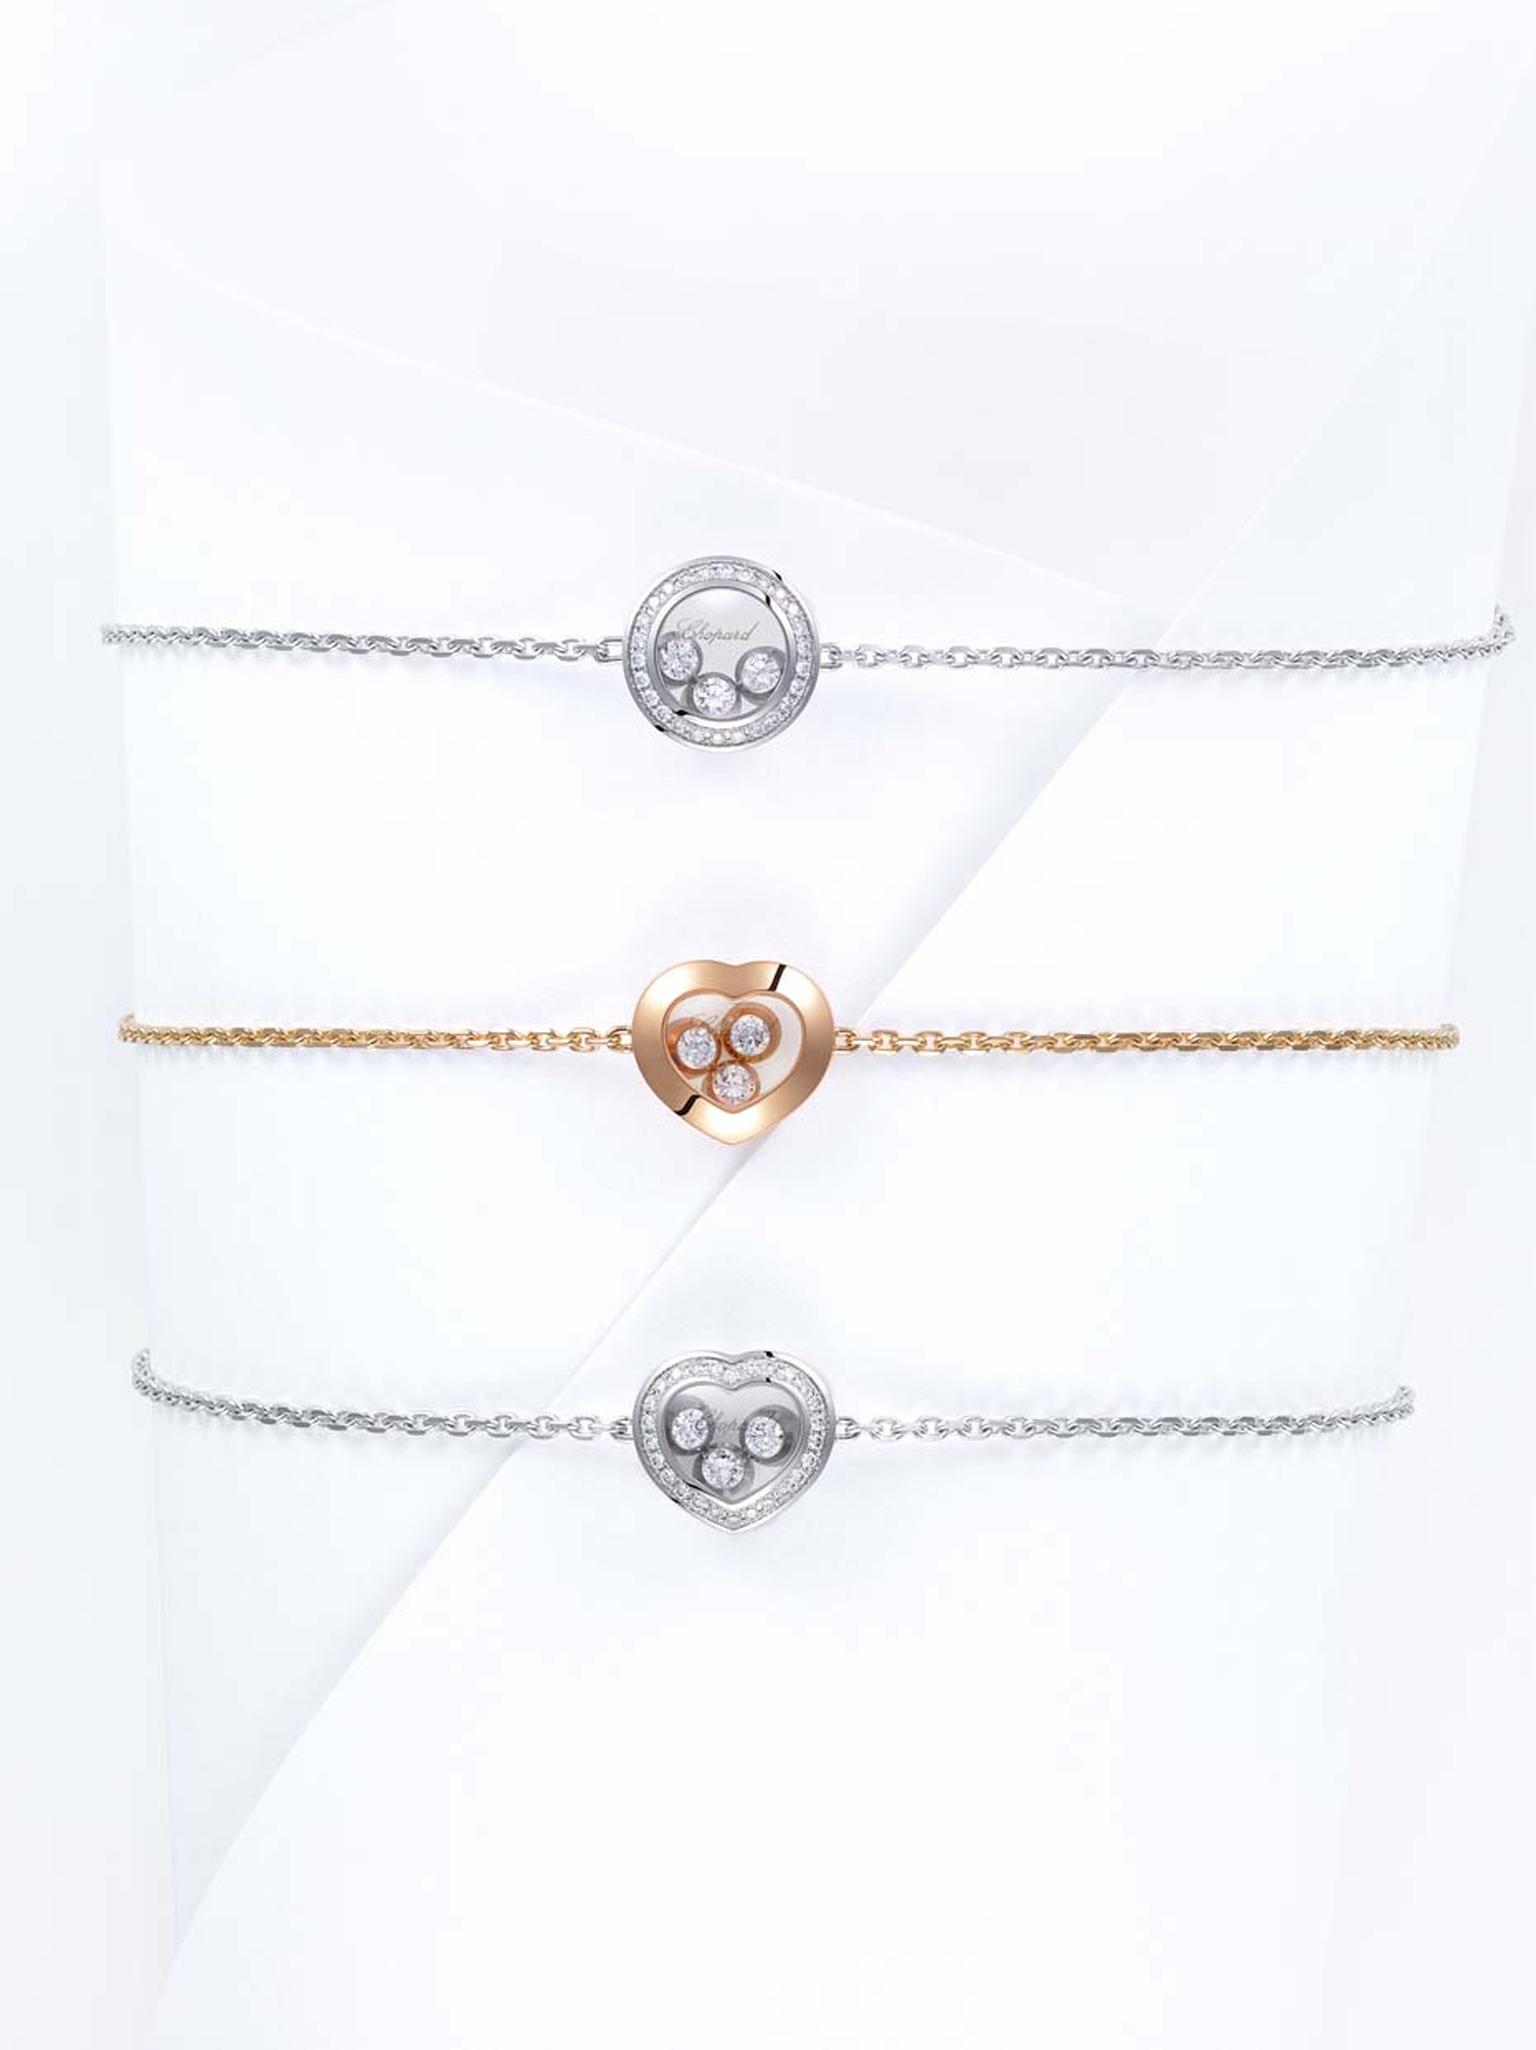 Chopard bracelets from the Happy Curves bracelet in white or rose gold with either a circular or heart motif carrying three freely moving brilliant-cut diamonds.